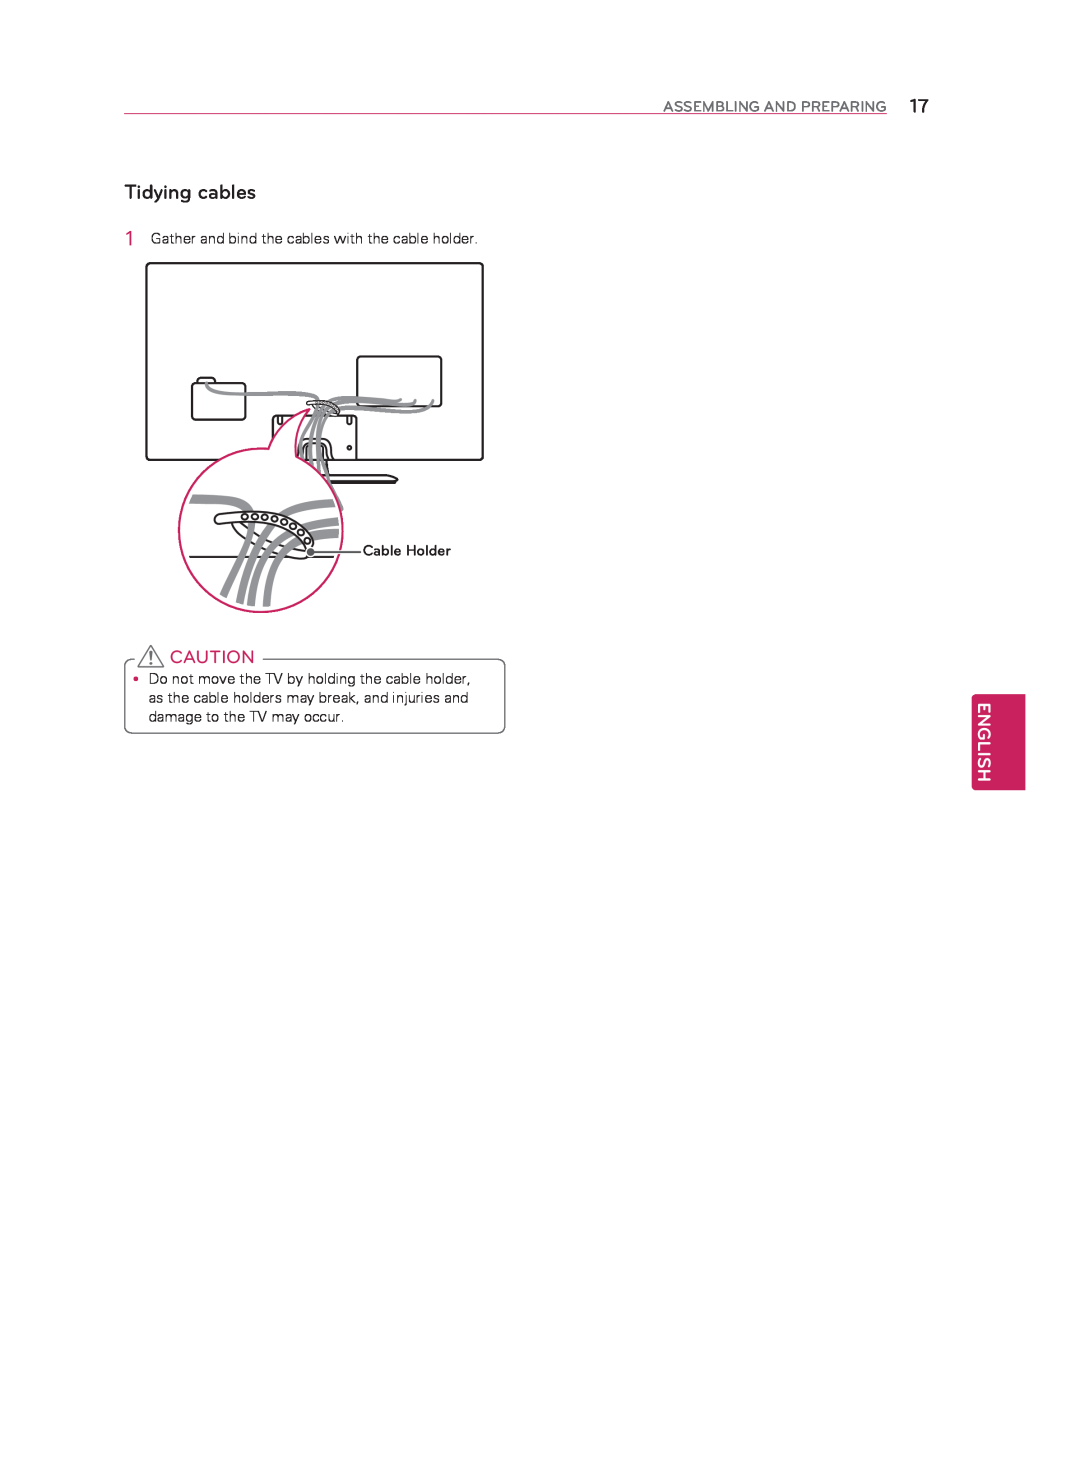 LG Electronics 60LN5400 owner manual Tidying cables, English, Gather and bind the cables with the cable holder Cable Holder 